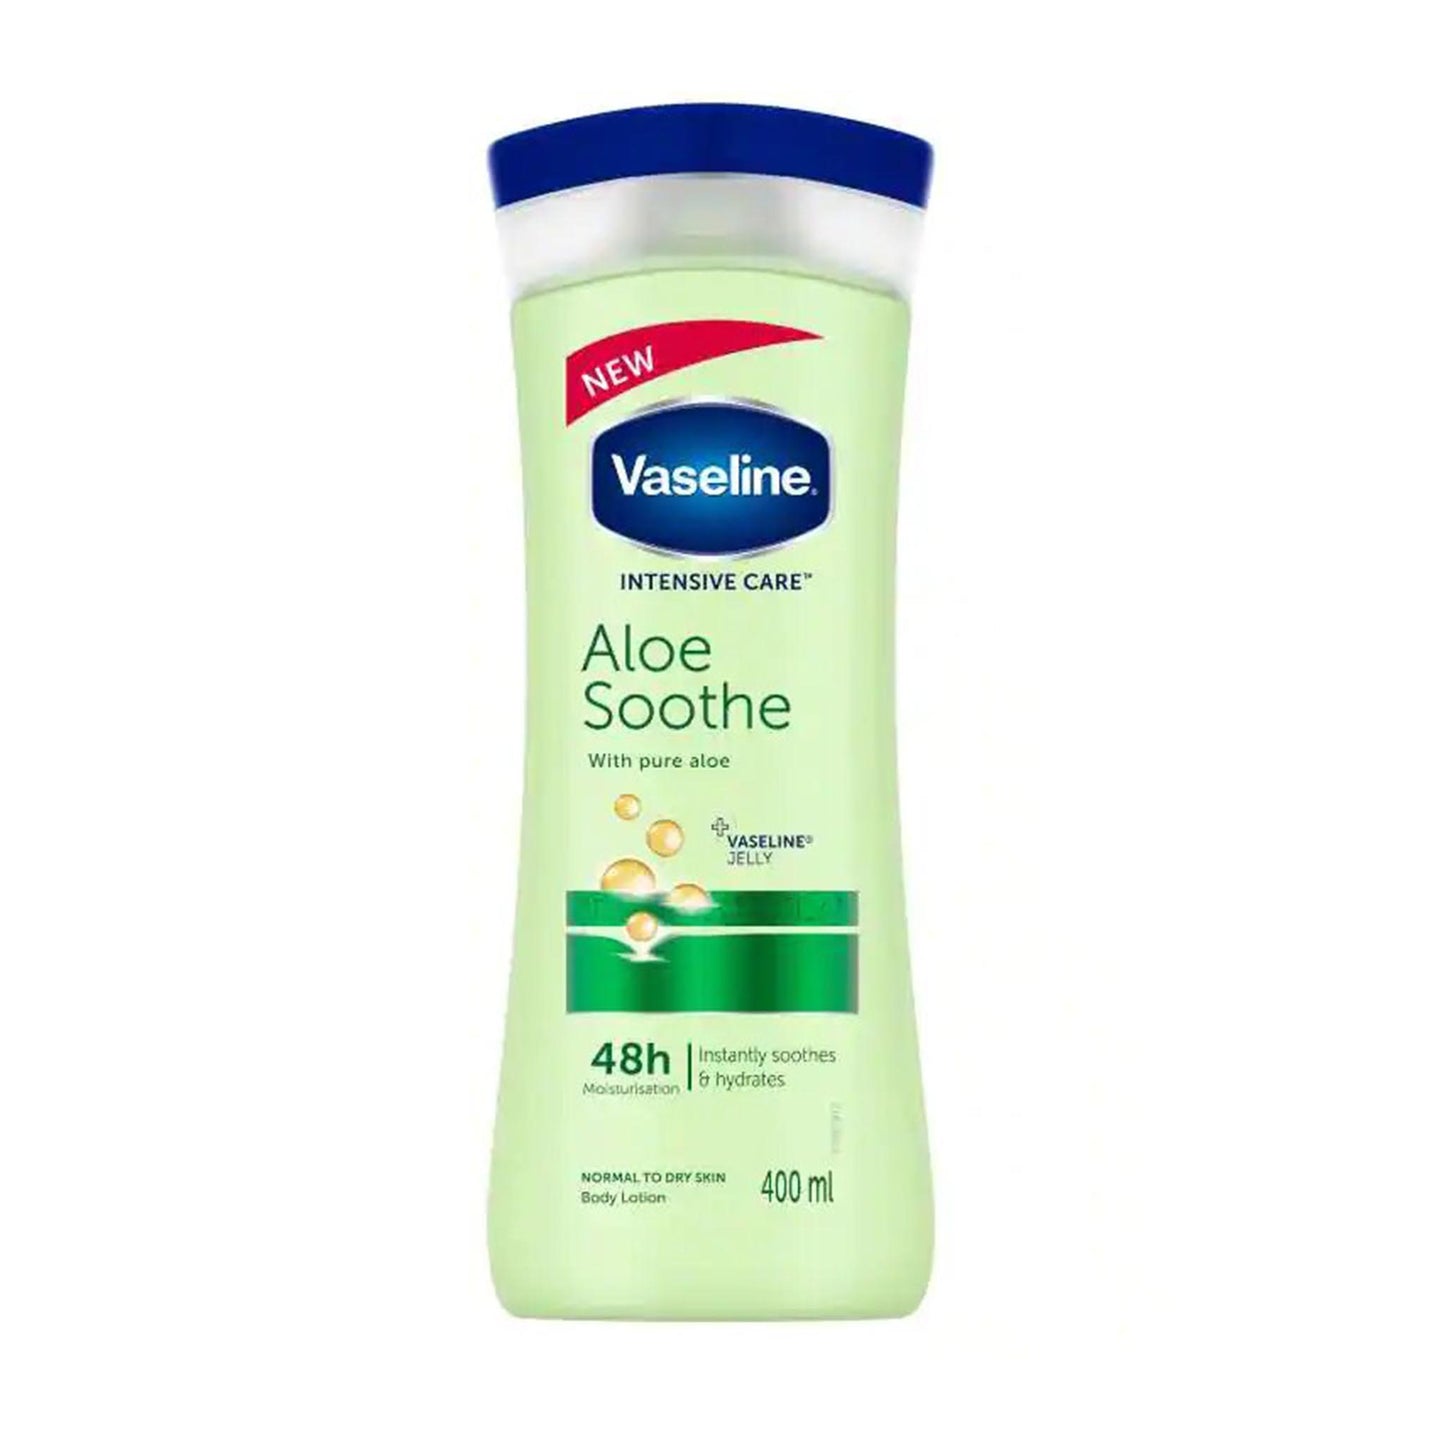 VASELINE - INTENSIVE CARE ALOE SOOTHE BODY LOTION - 400ML